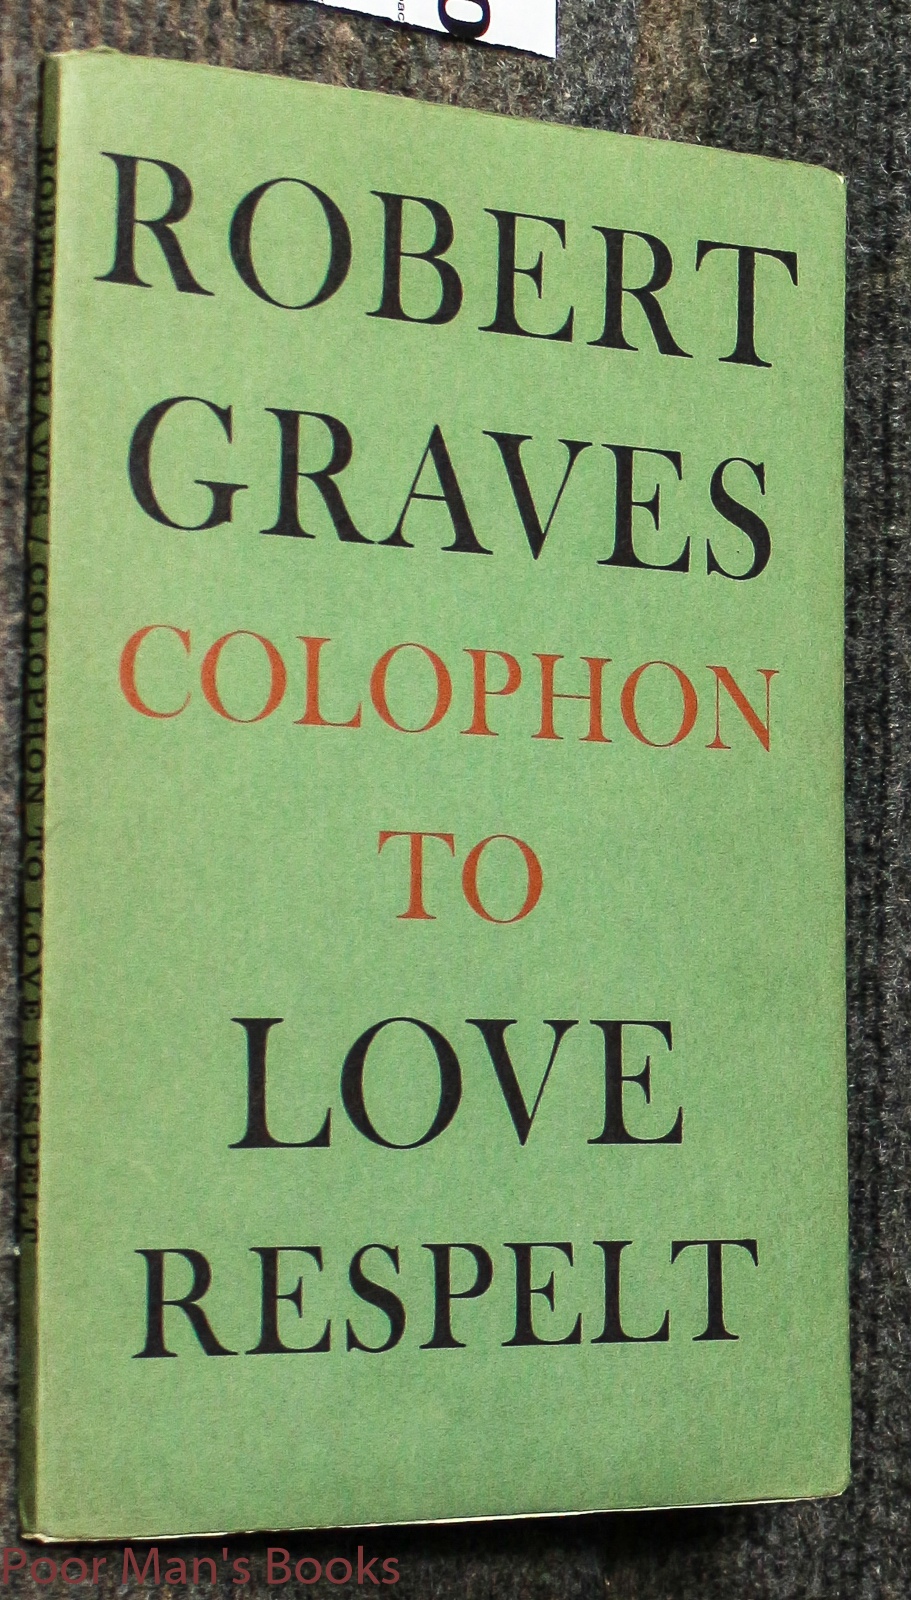 Image for COLOPHON TO LOVE RESPELT.